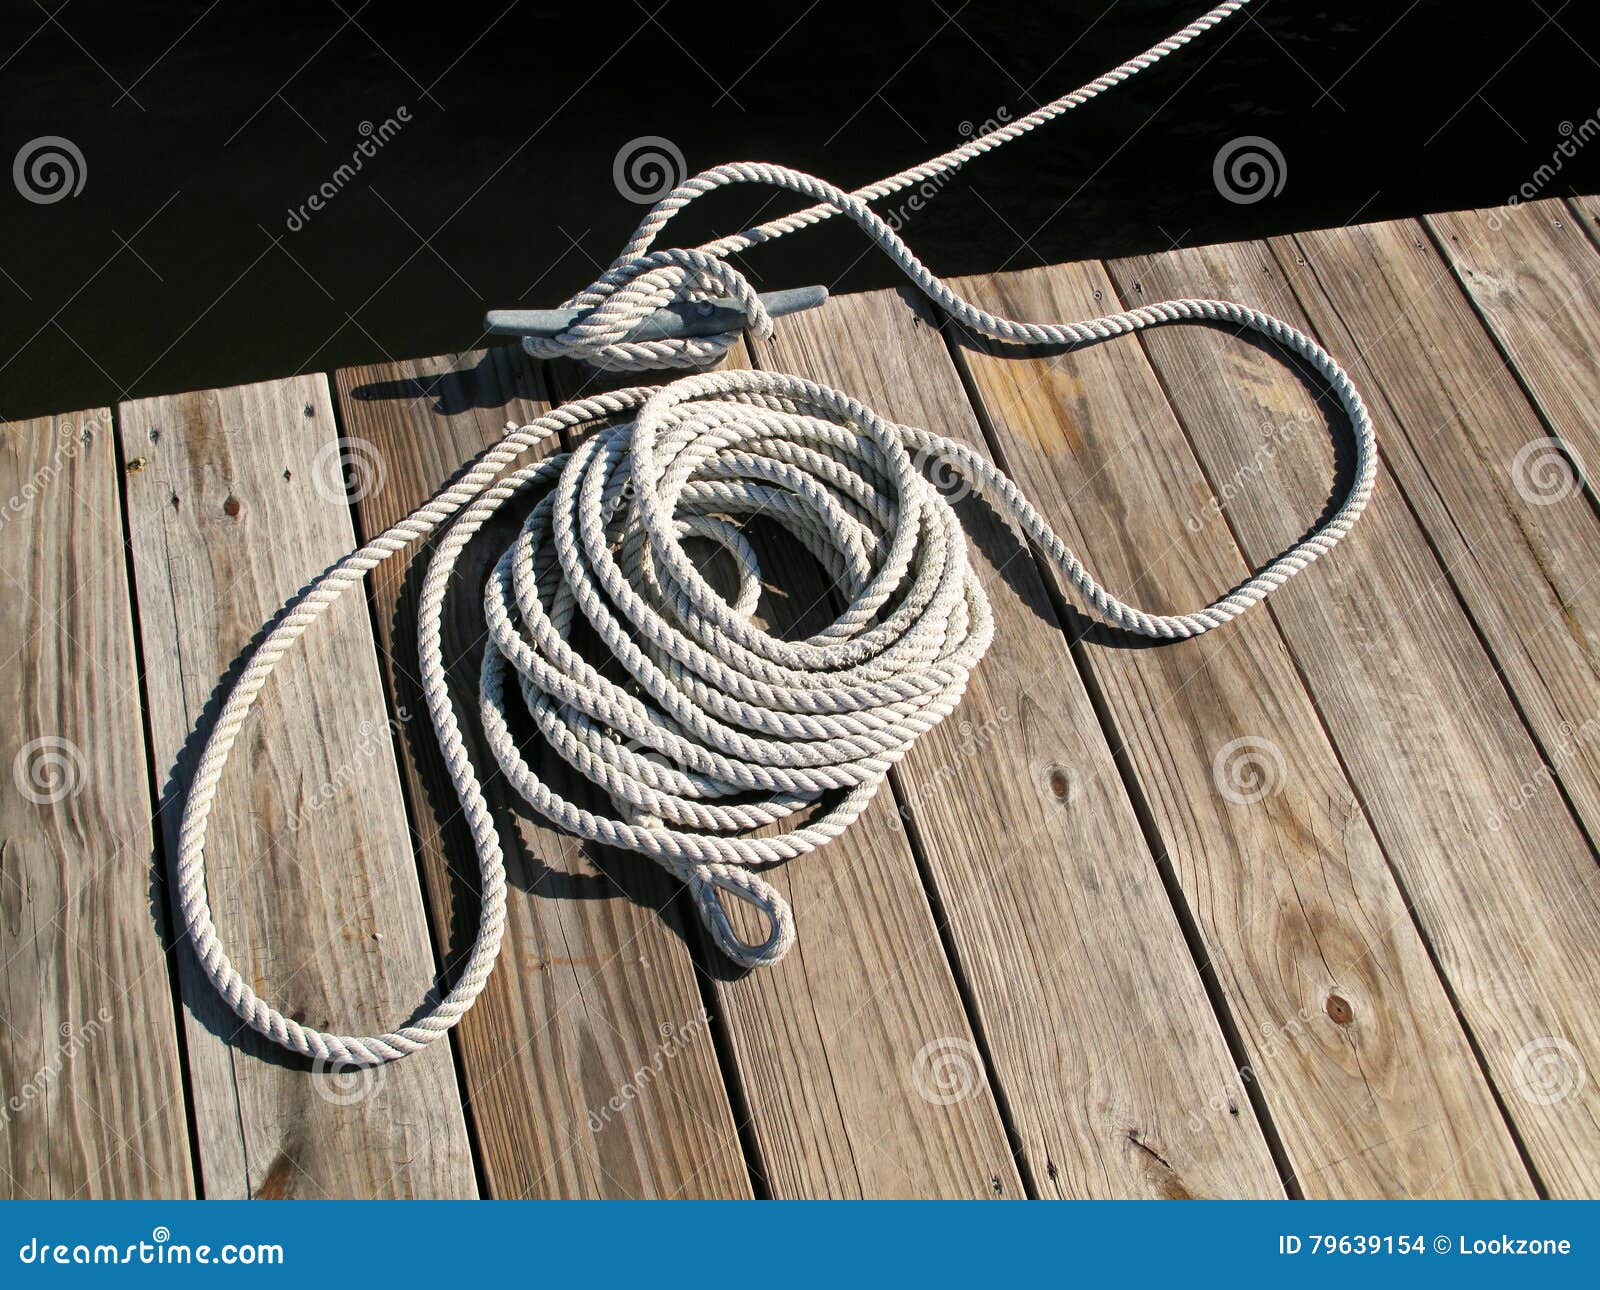 Boat Rope Tie Down stock photo. Image of boating, anchored - 79639154